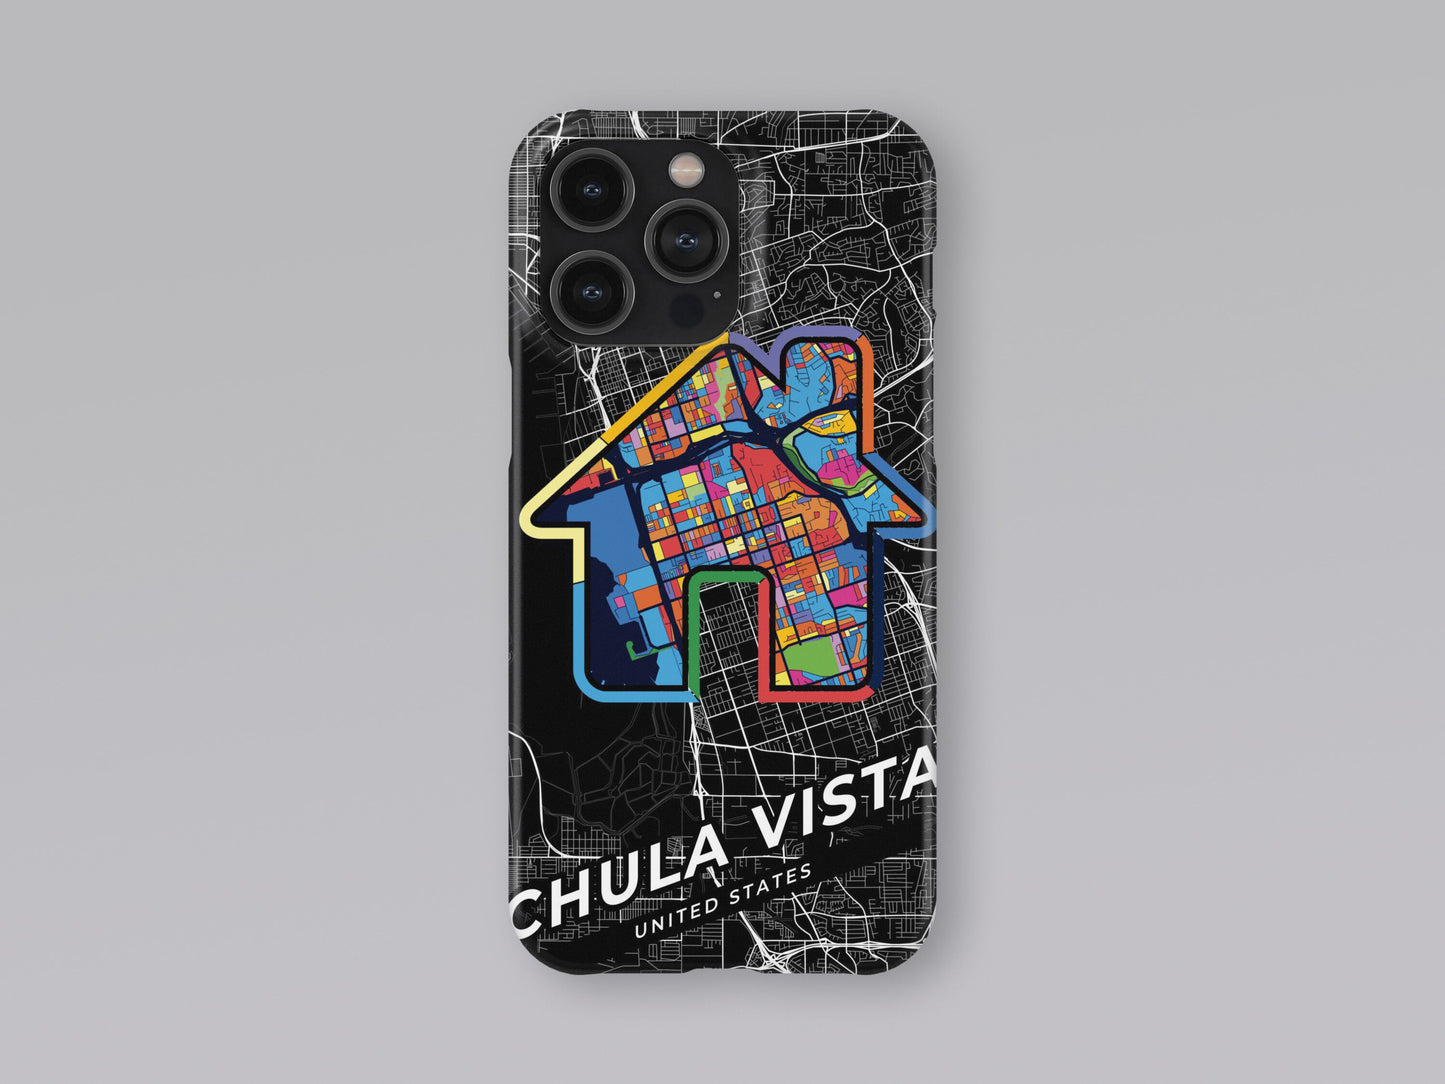 Chula Vista California slim phone case with colorful icon. Birthday, wedding or housewarming gift. Couple match cases. 3